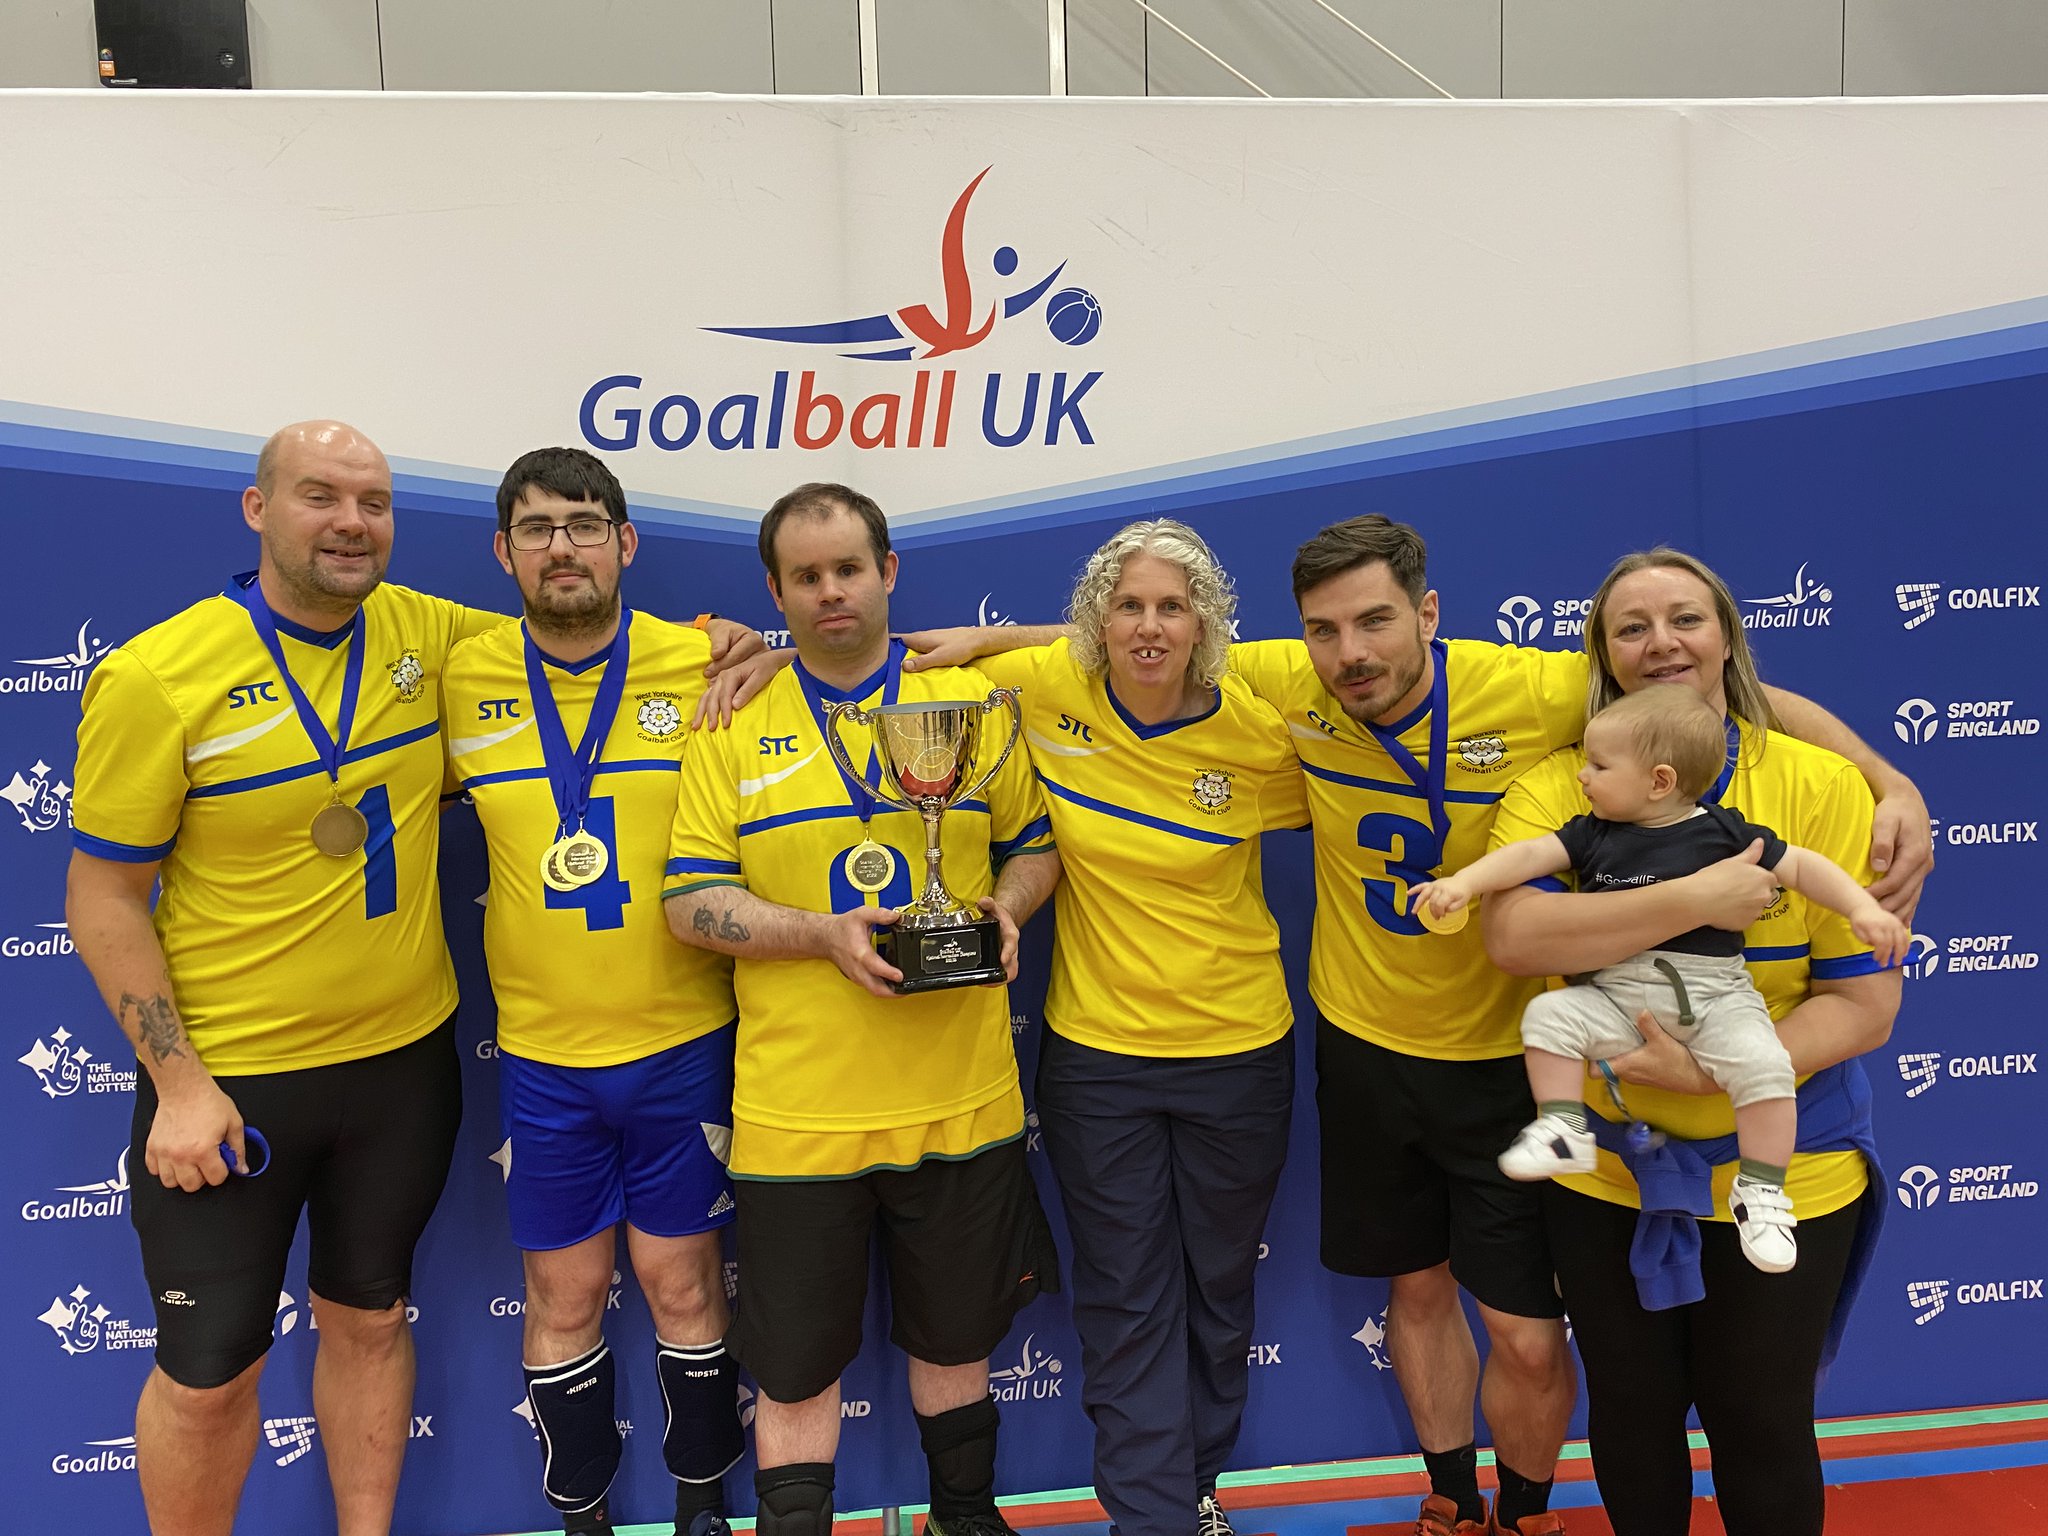 West Yorkshire Intermediate National Finals group photo in front of a Goalball UK banner with all players and coaches, who have their medals and the trophy!